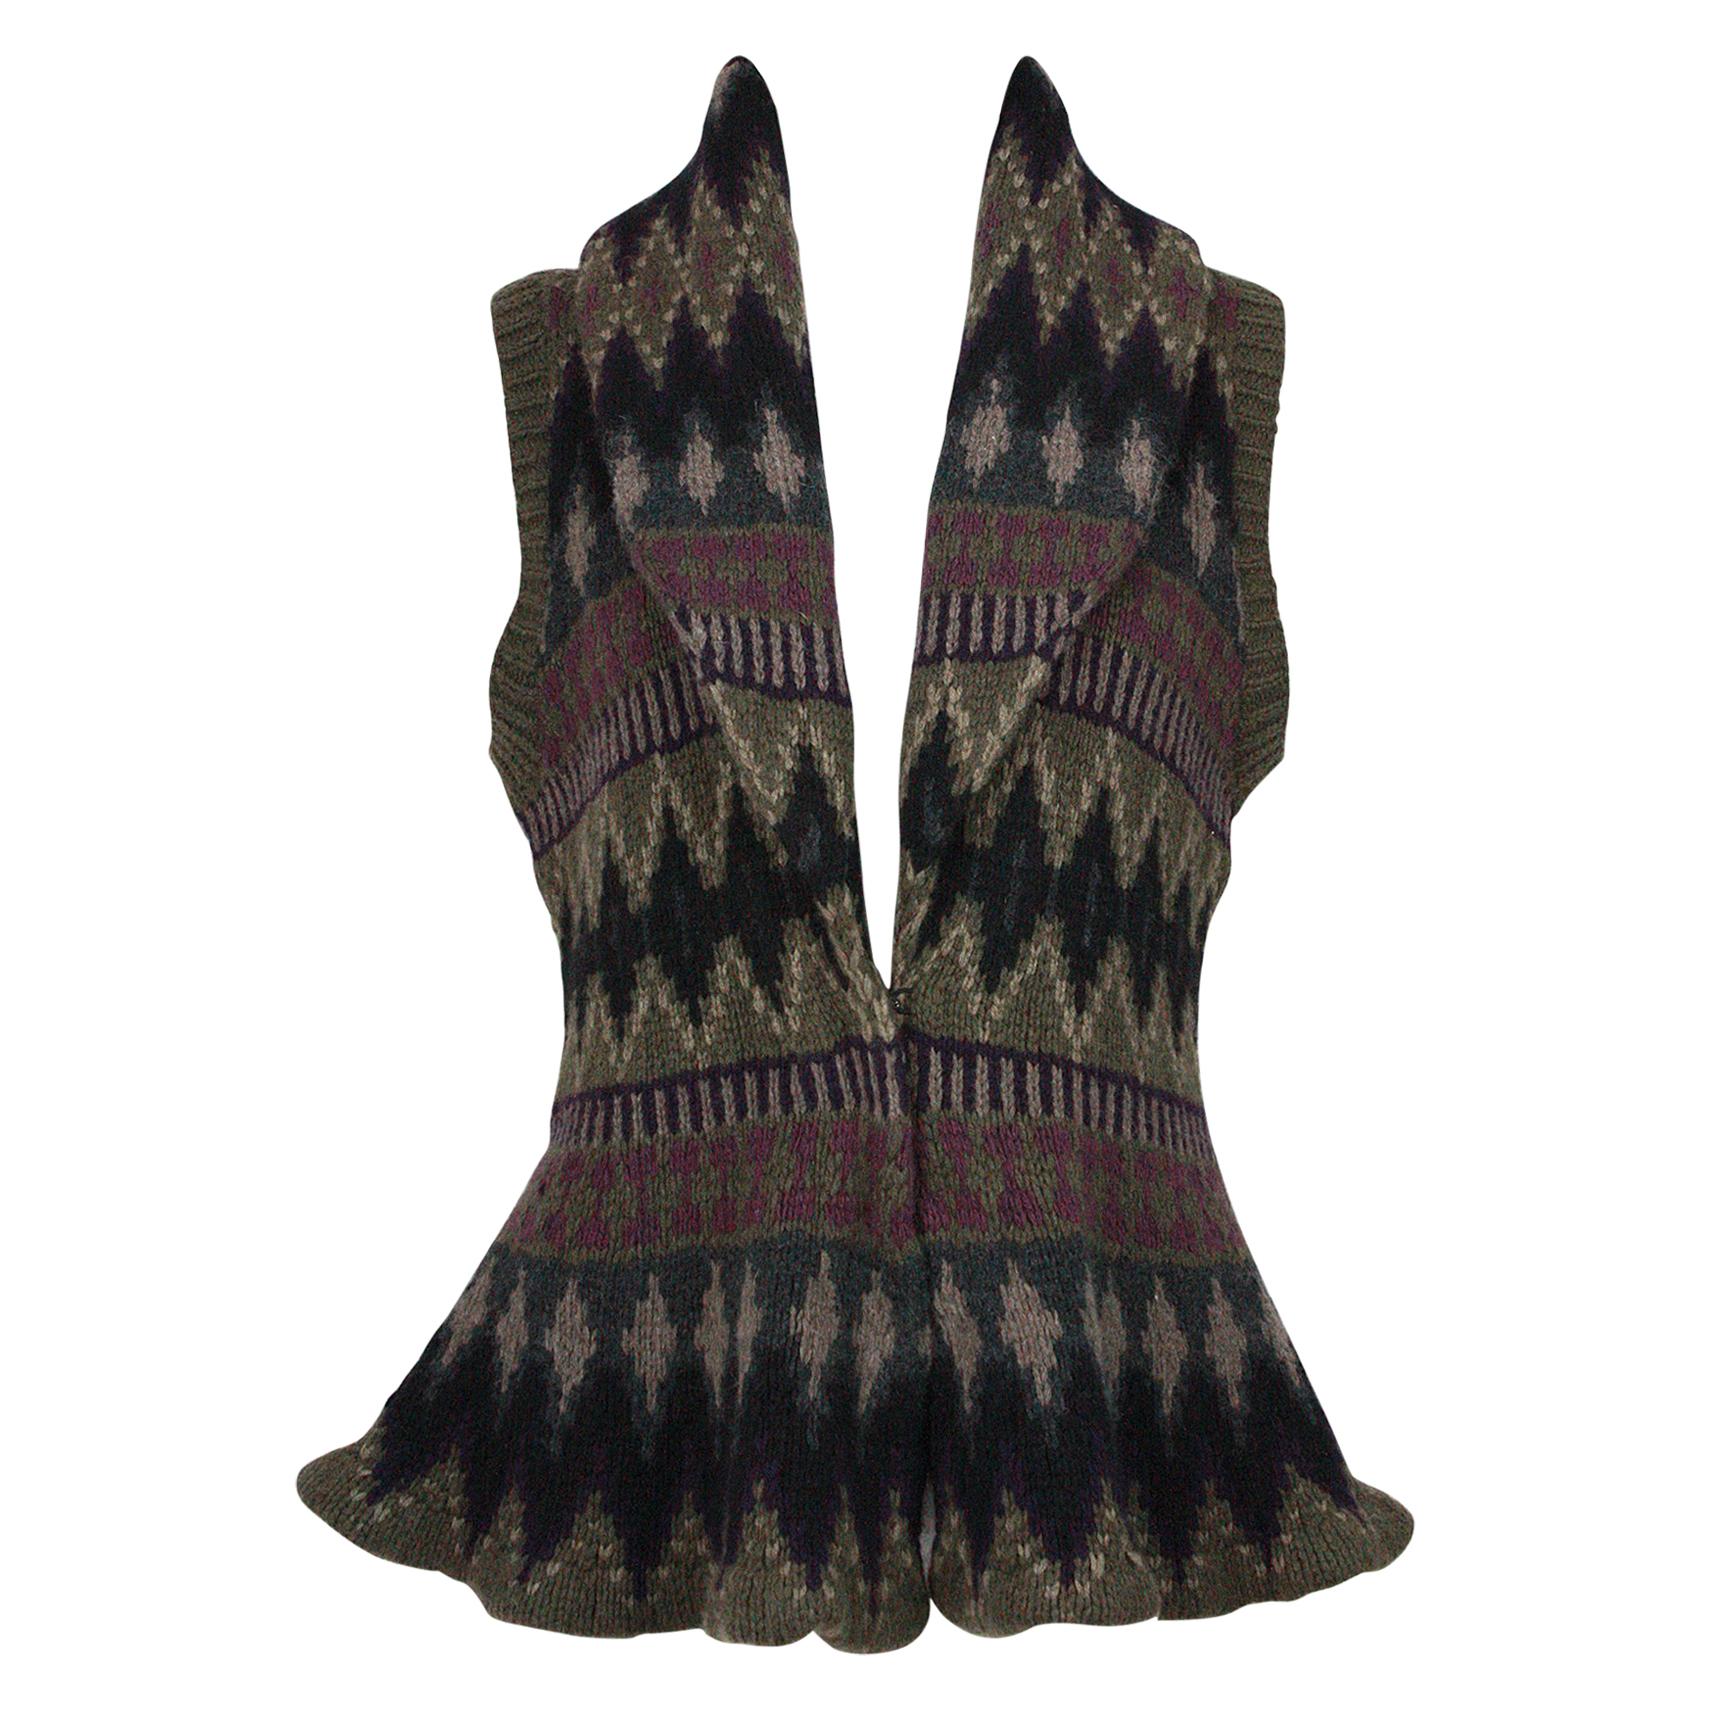 Ralph Lauren
Knit vest with peplum
Shawl collar
Soft thick weave that stretches 
Cashmere blend
Southwest pattern
Black hook and eye closures 